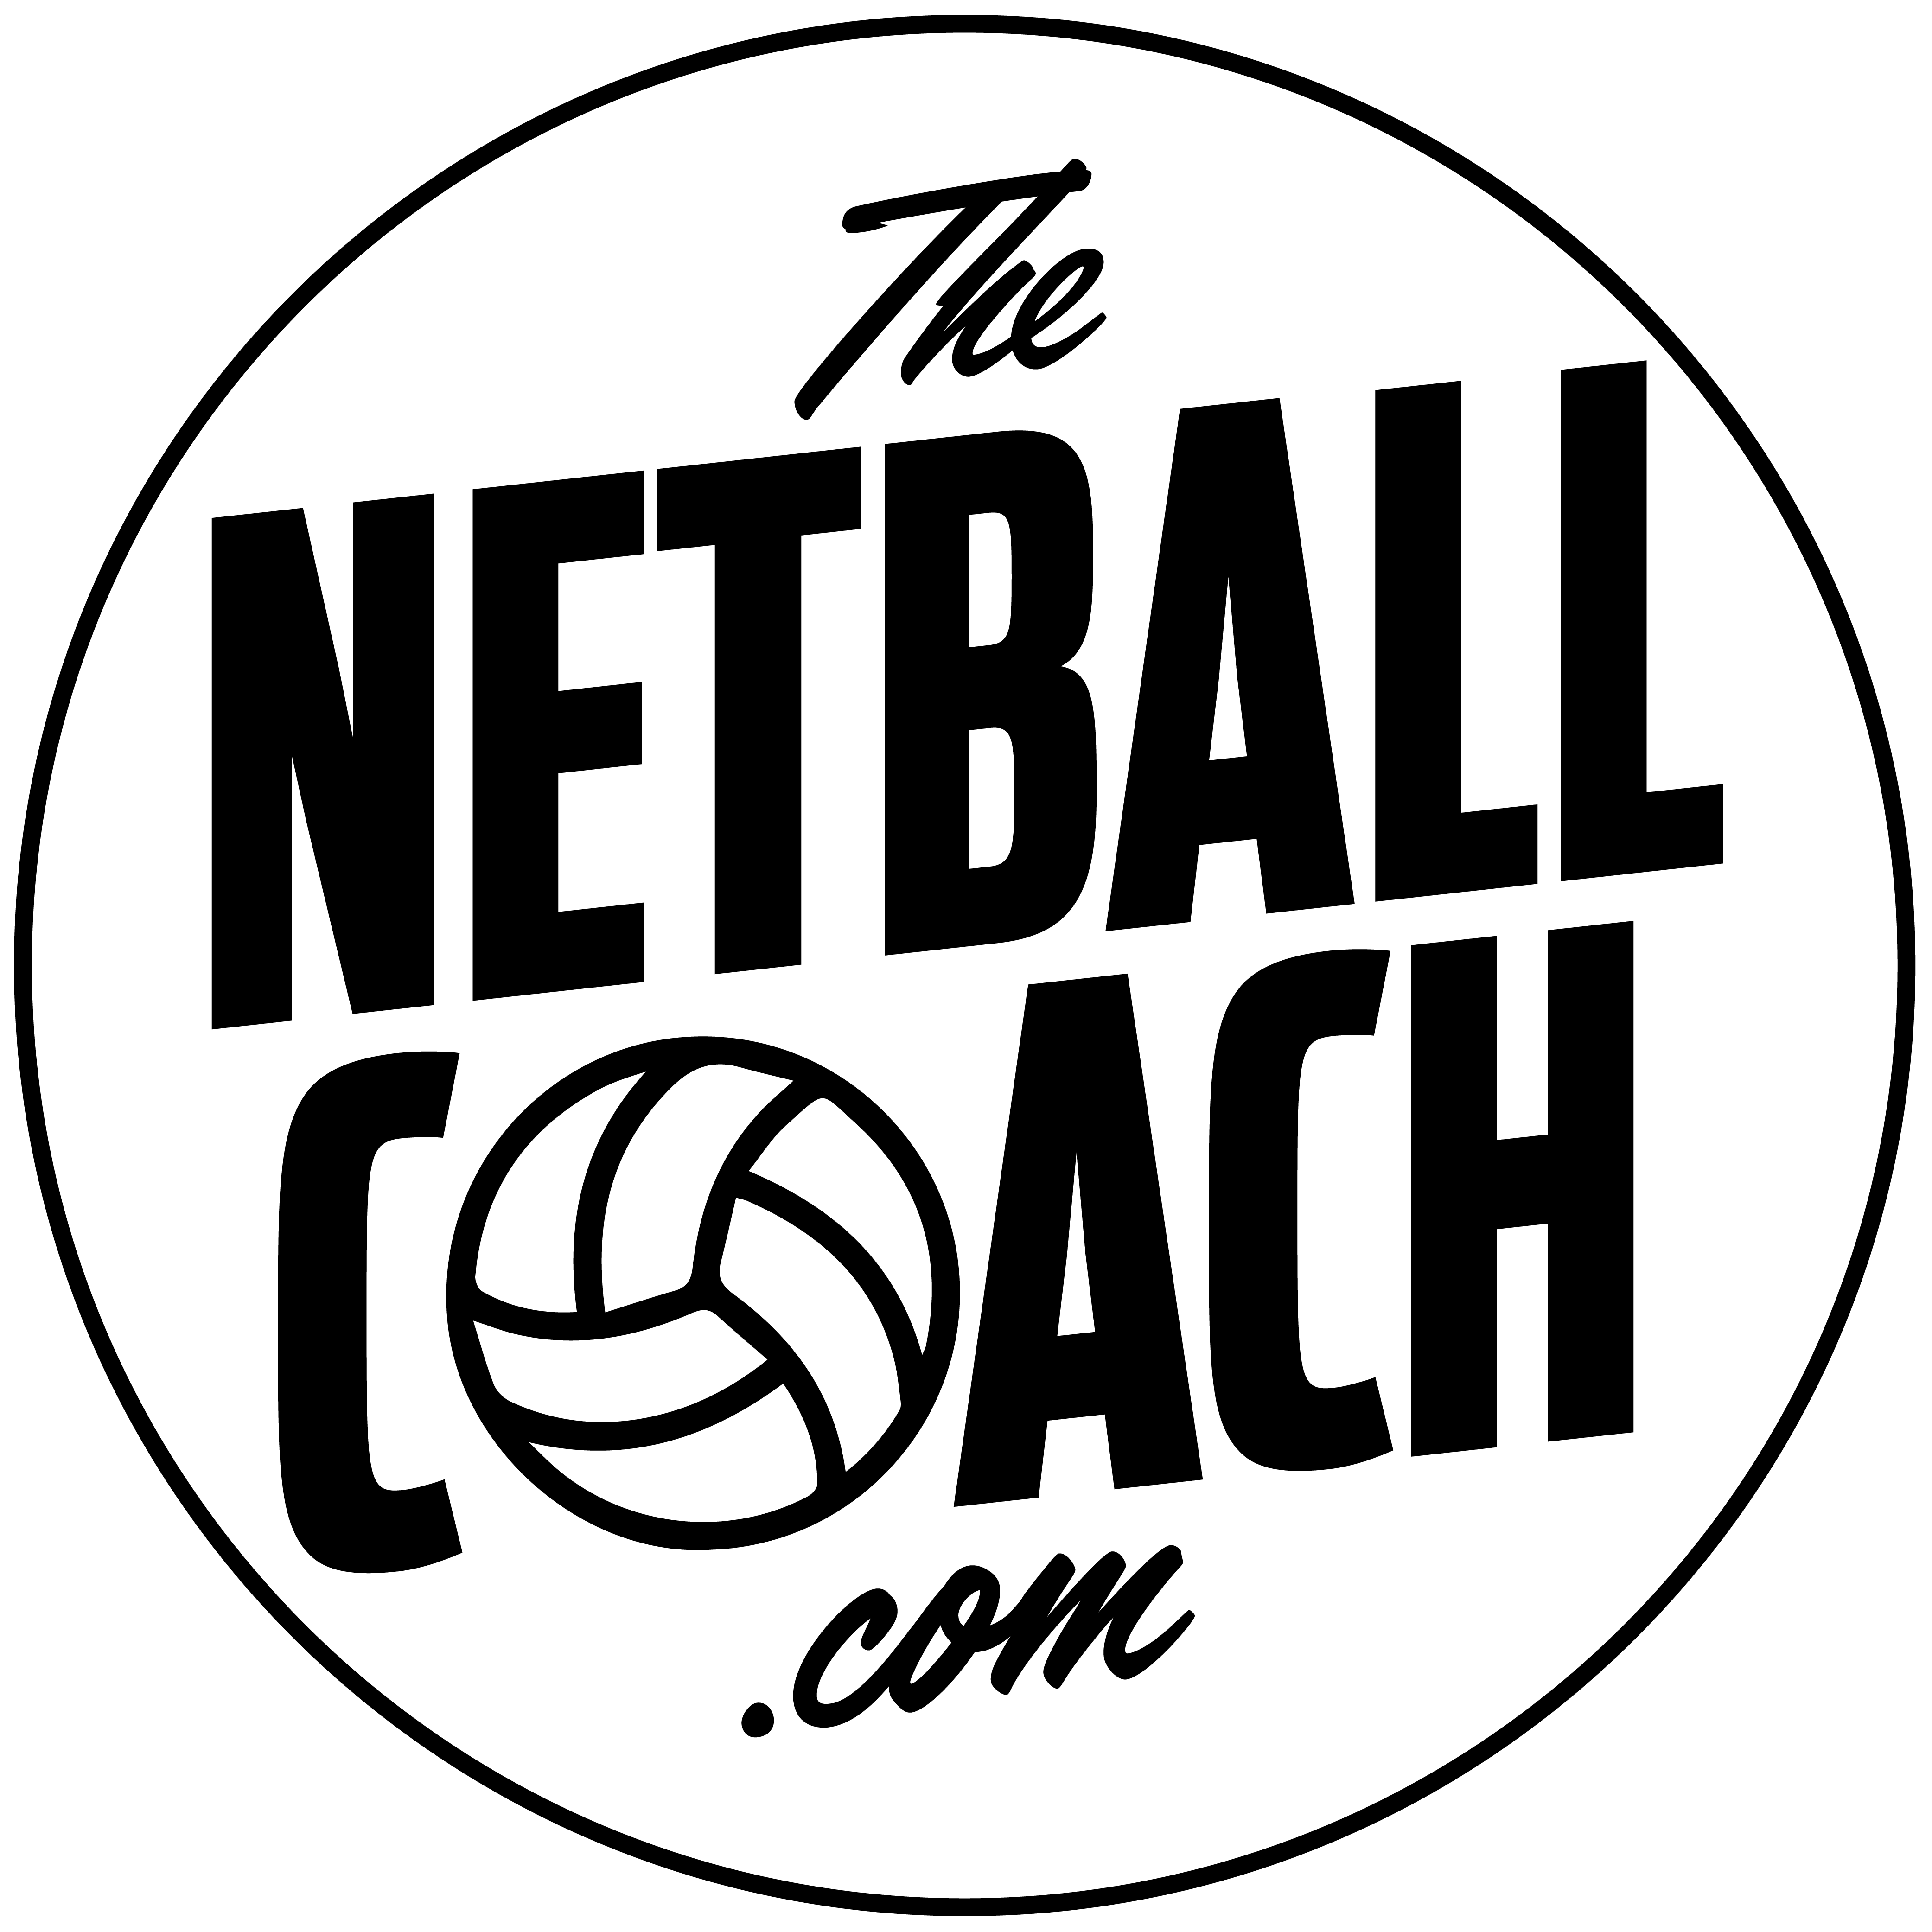 thenetballcoach.com - Netball coaching videos, drills and training resources for coaches and players